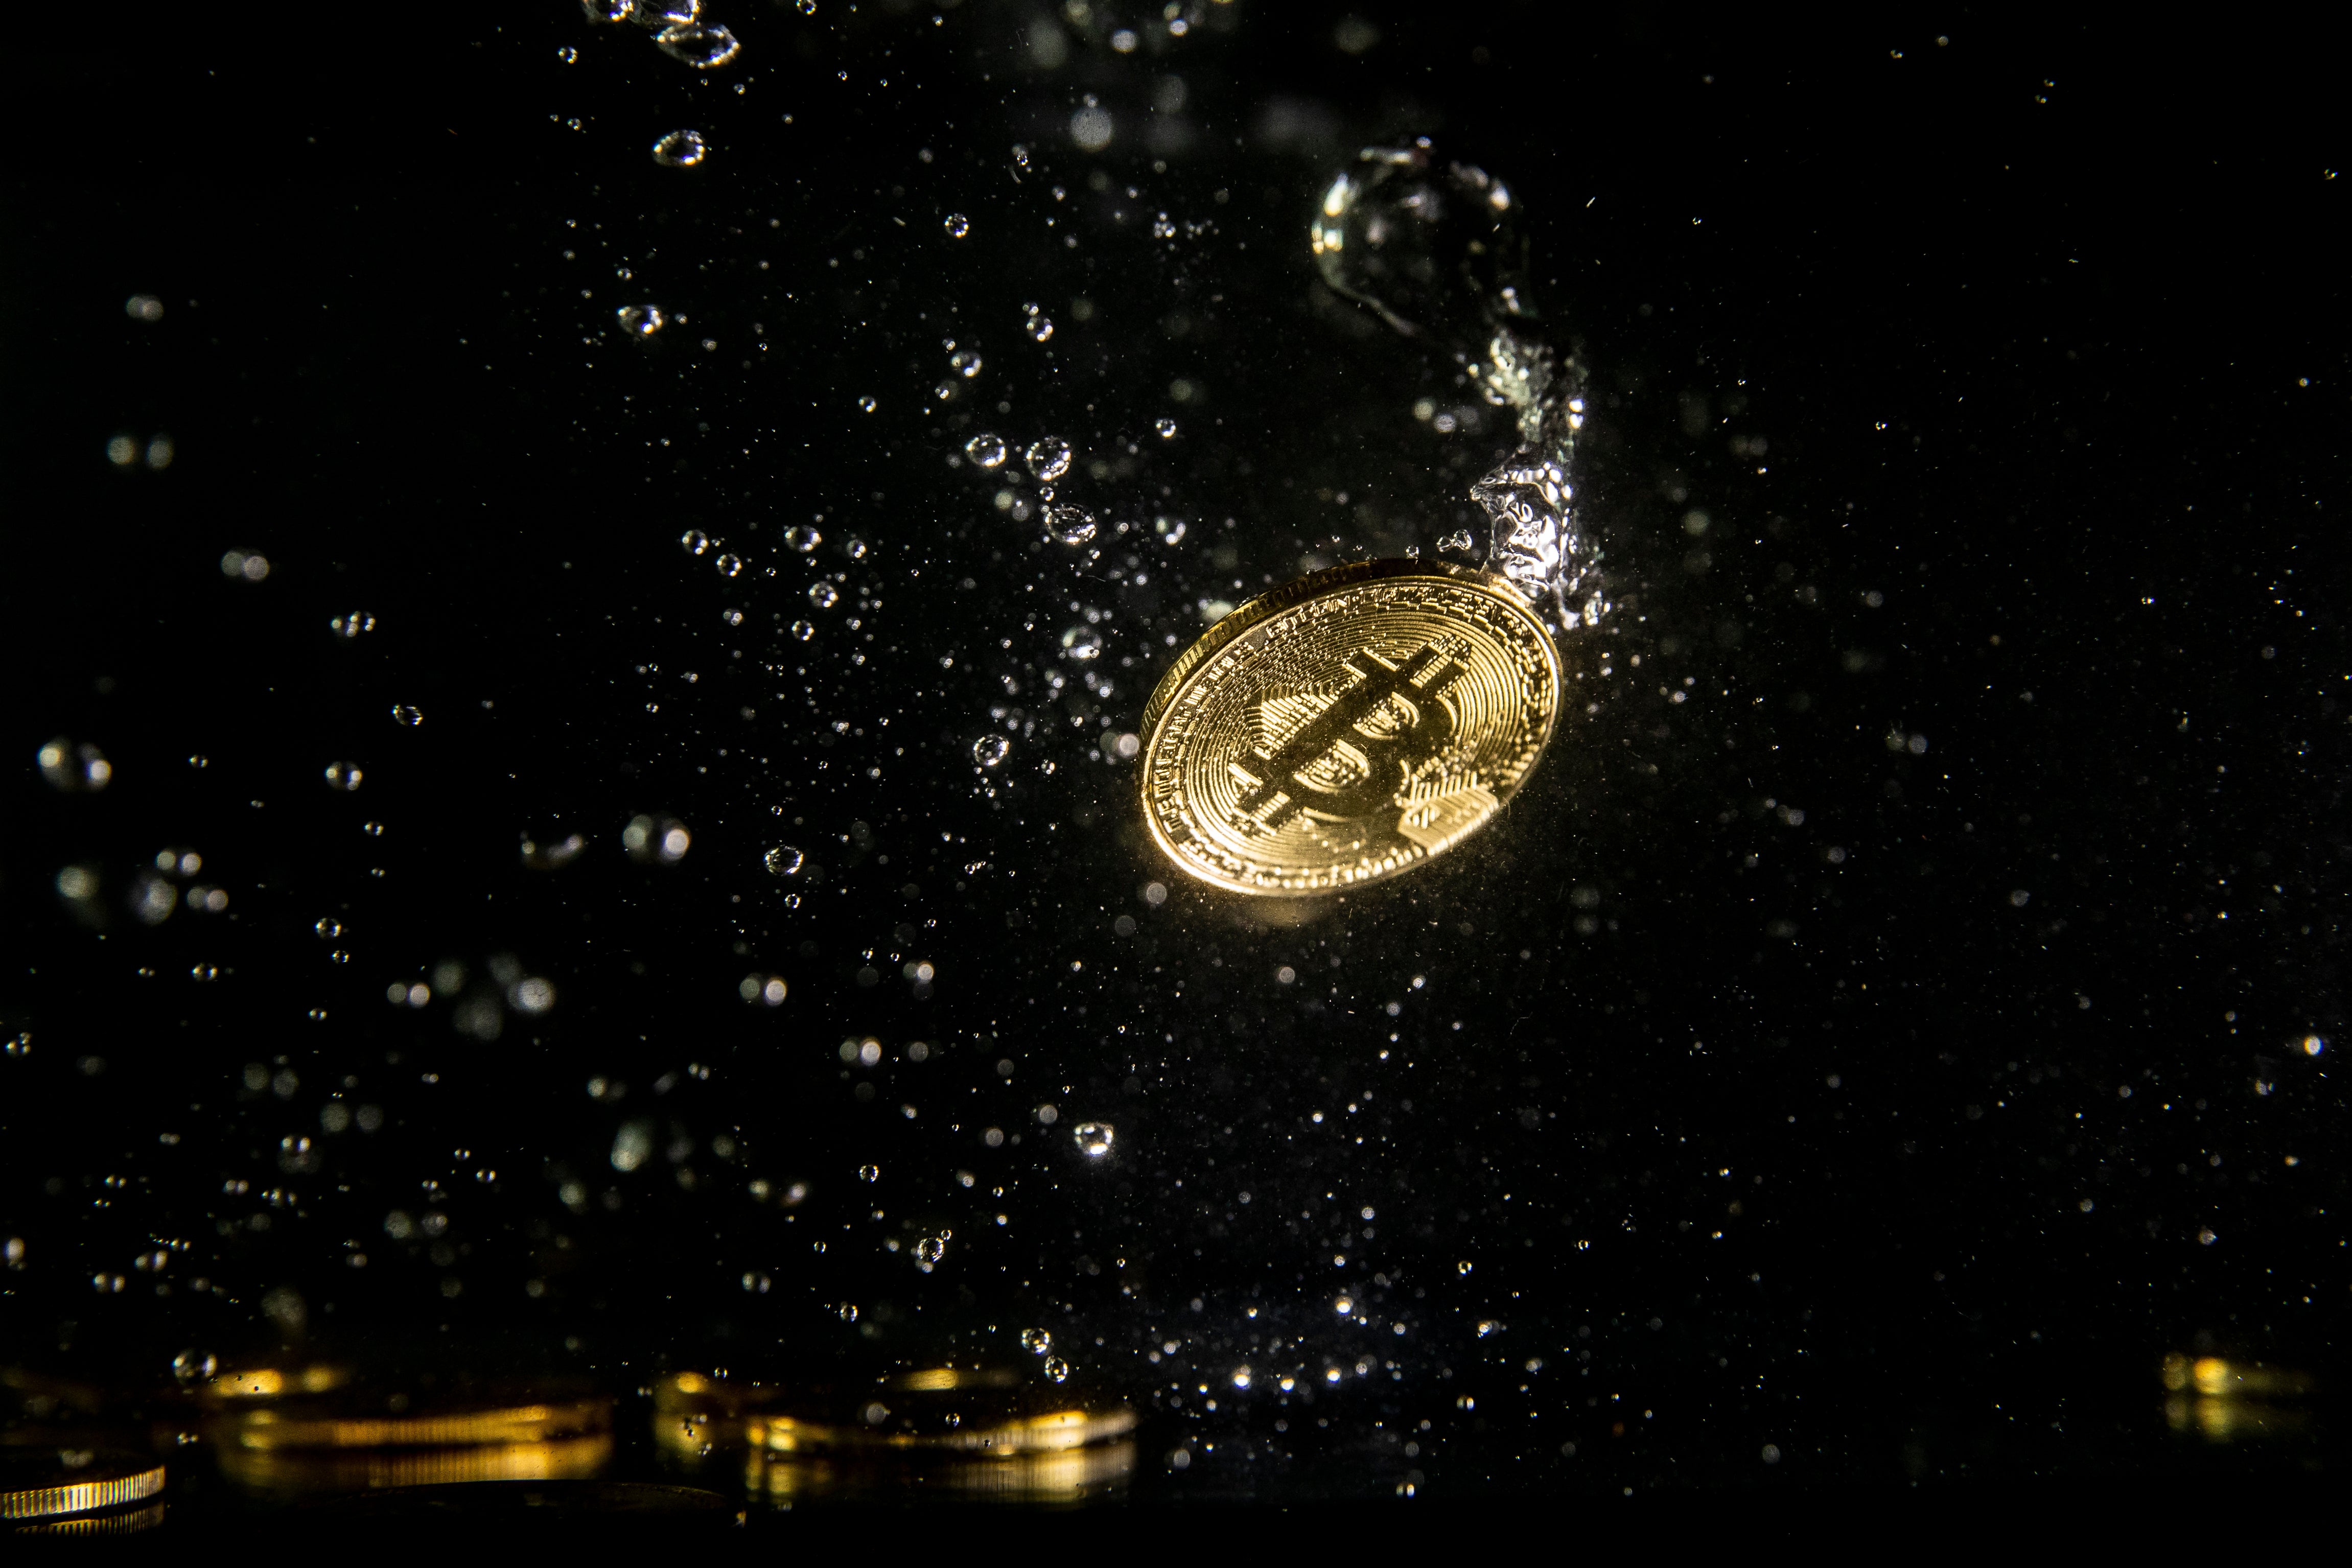 A visual representation of the digital currency Bitcoin sinking into water on 15 August, 2018 in London, England